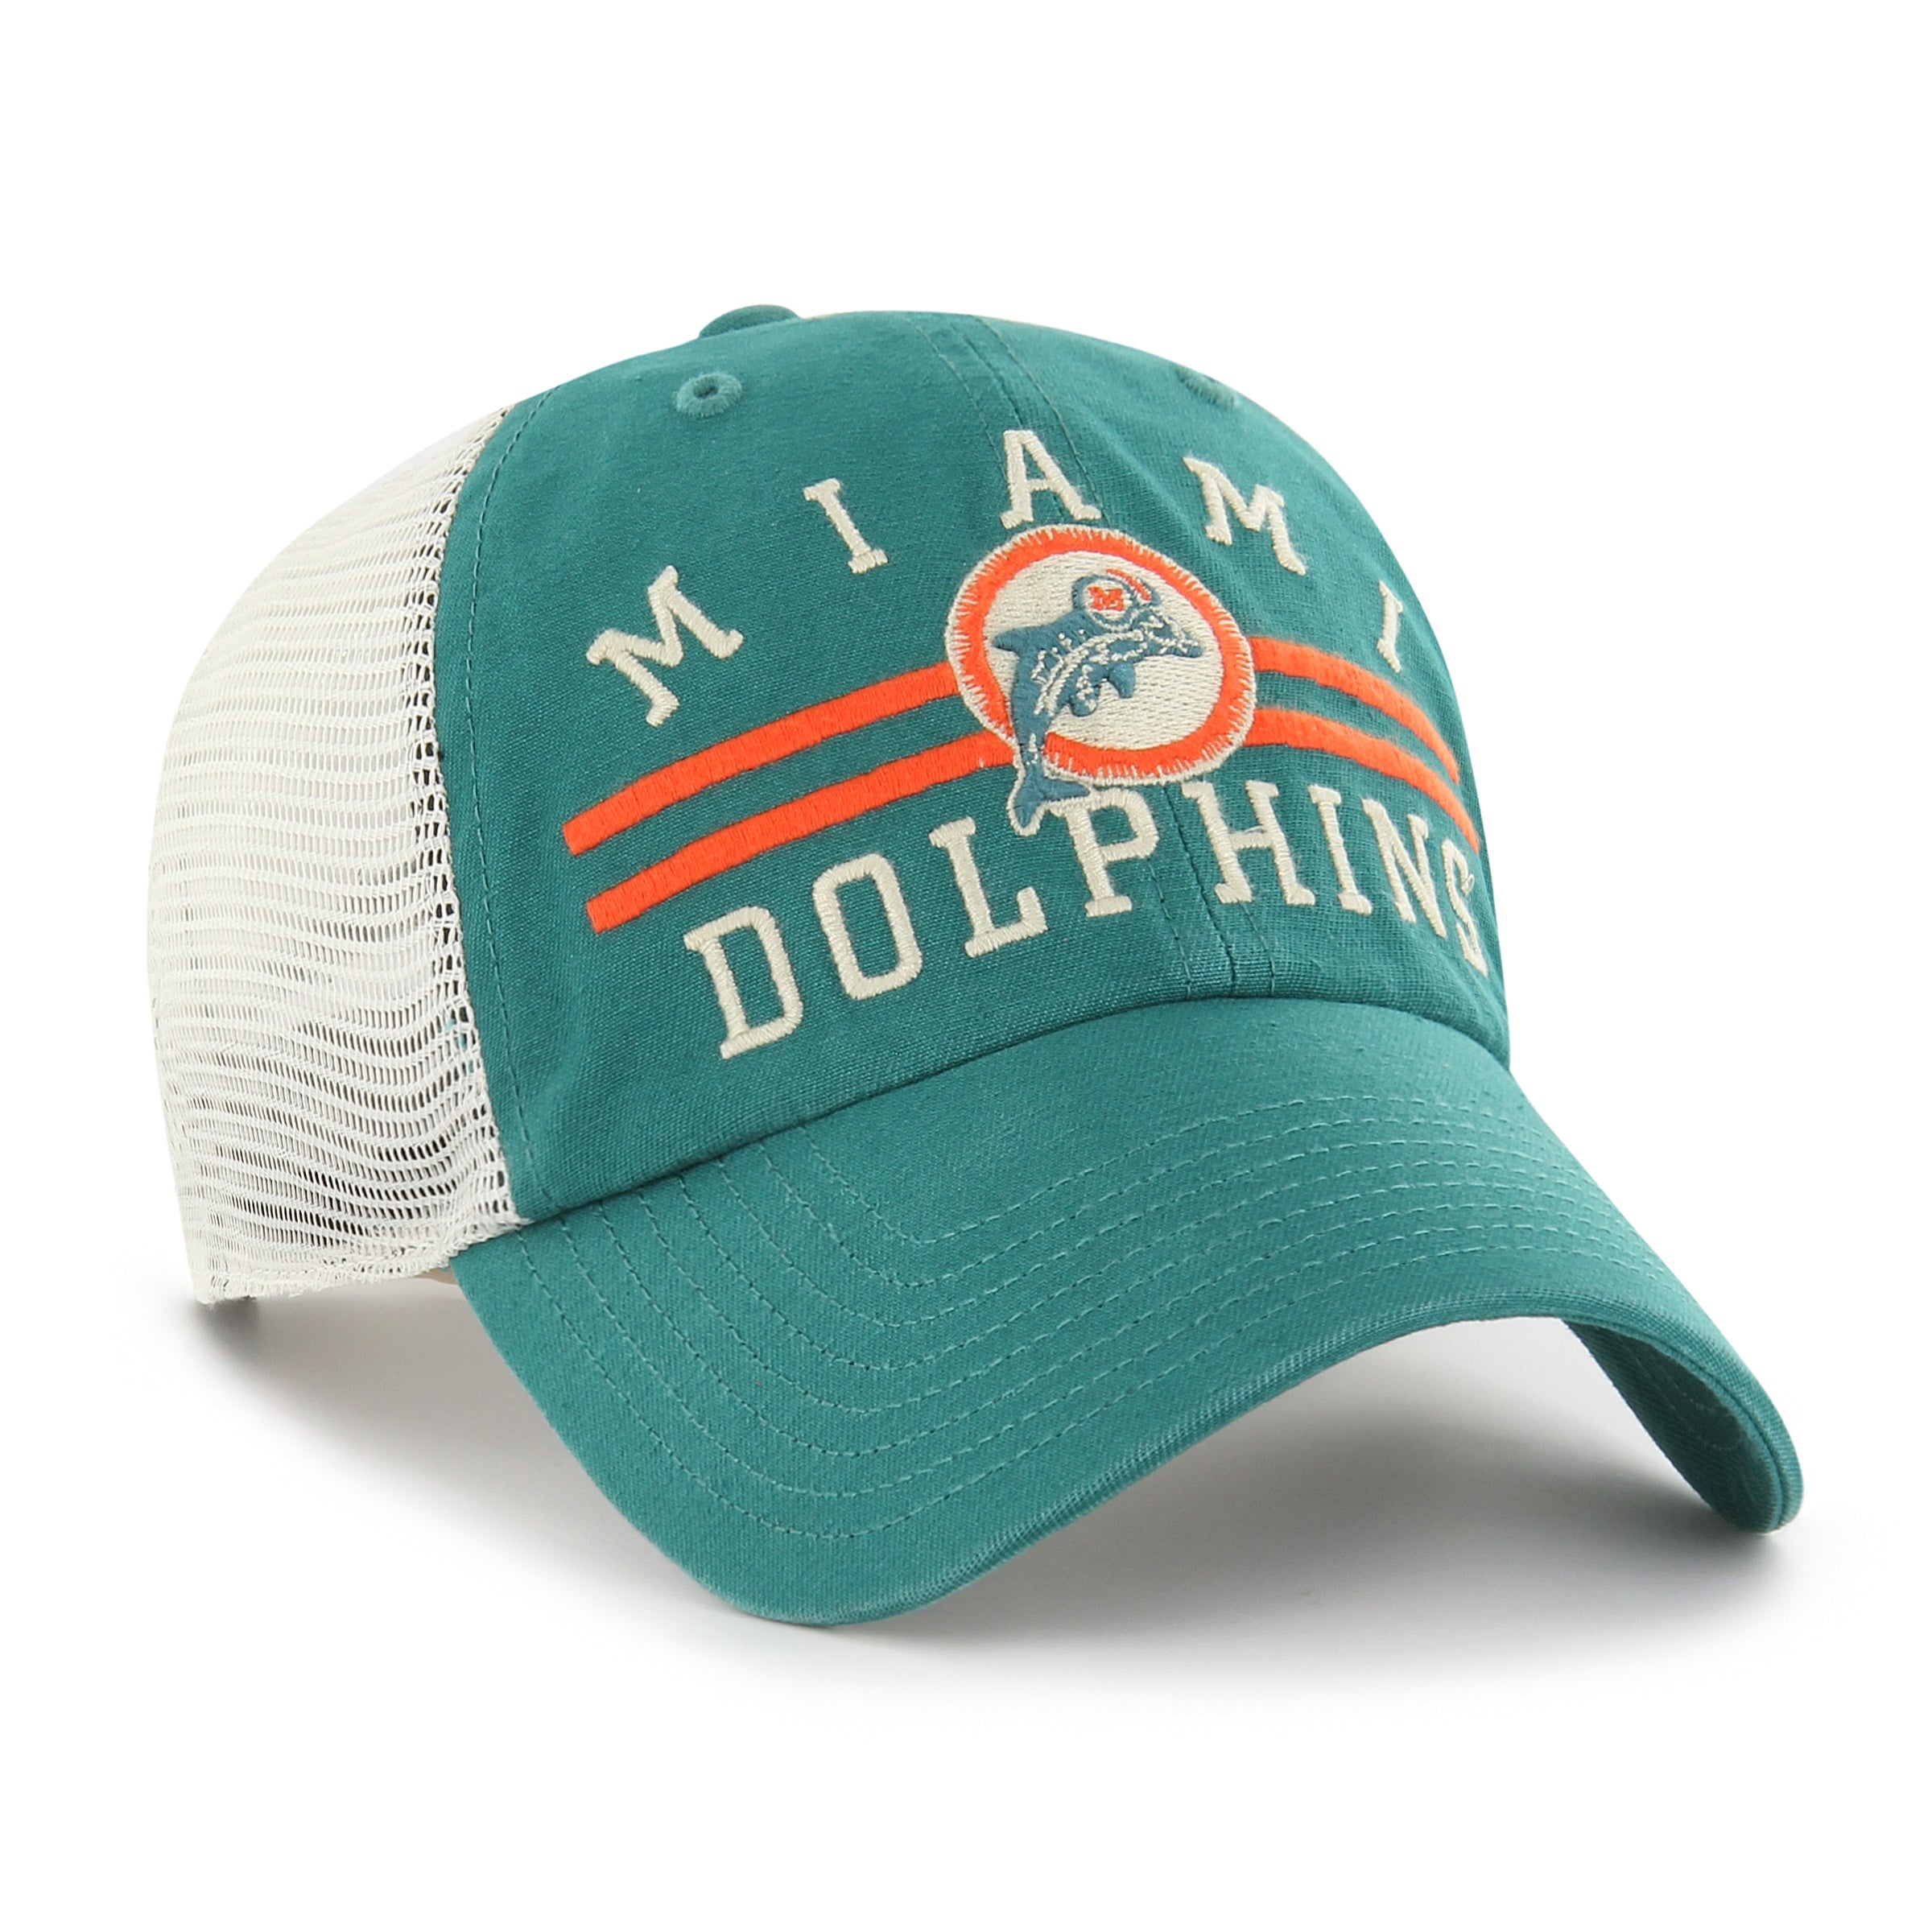 Miami Dolphins 47 Brand Legacy Tailgate Teal Clean Up Adjustable Hat